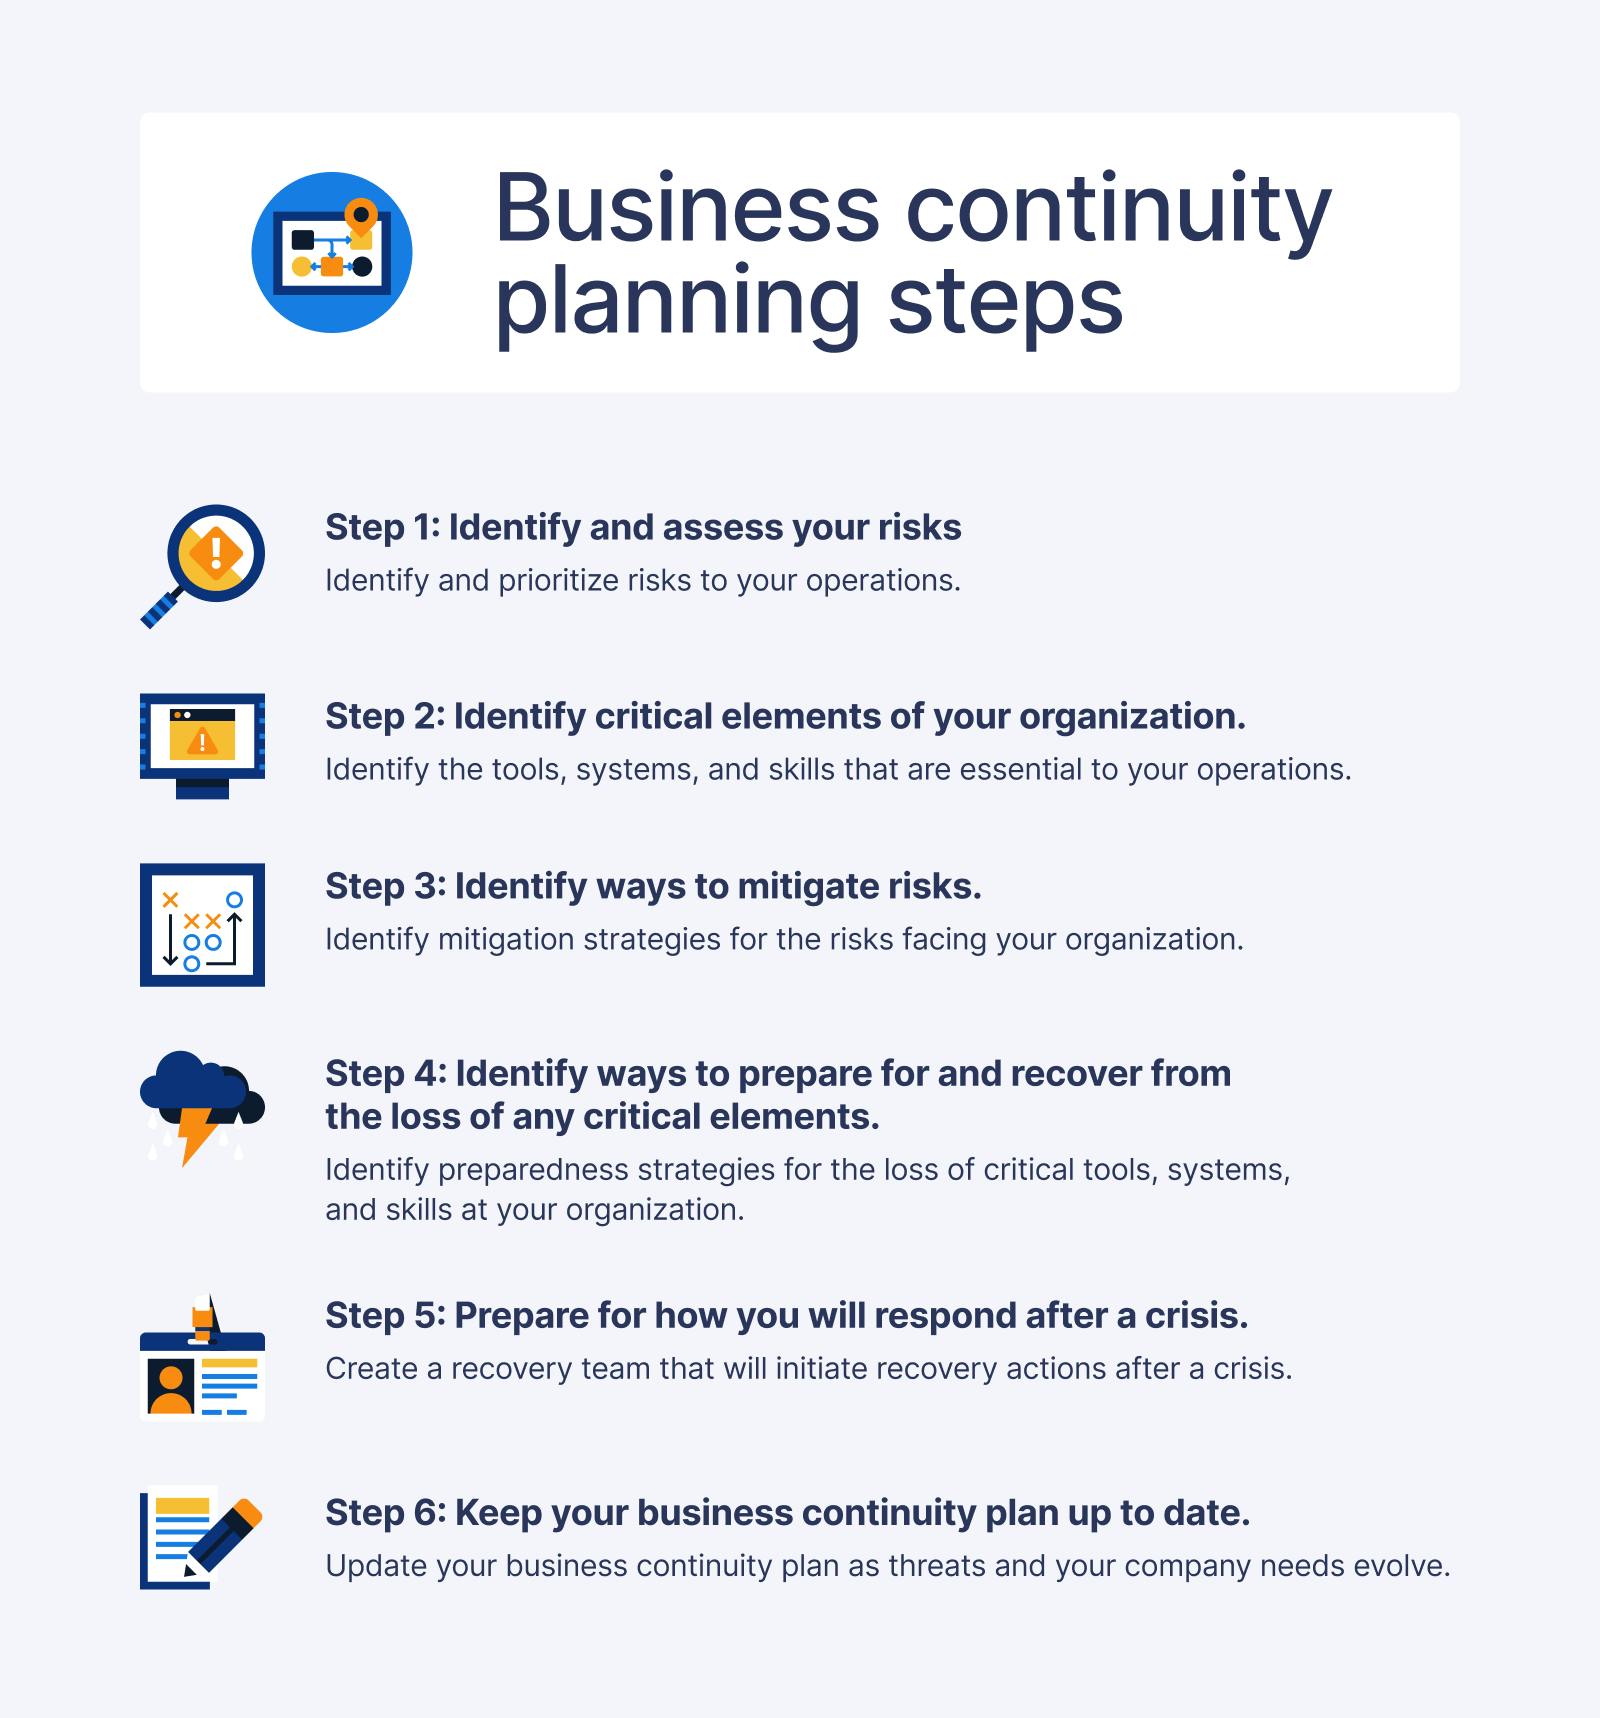 7 steps outlined for business continuity planning, starting with risk assessment and ending with keeping plan up to date